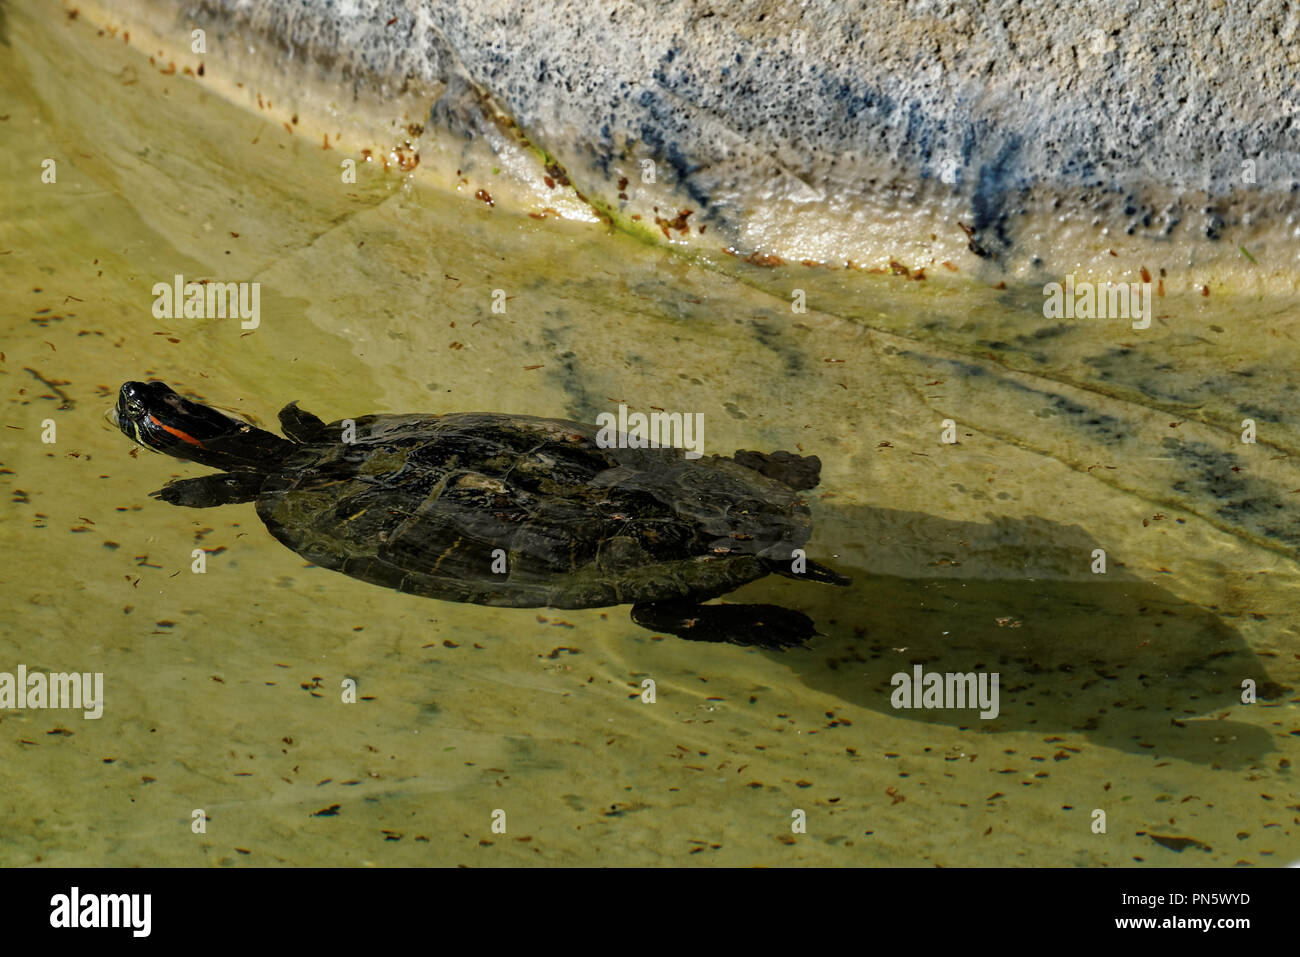 Red-eared sliders in a swimming pool Stock Photo